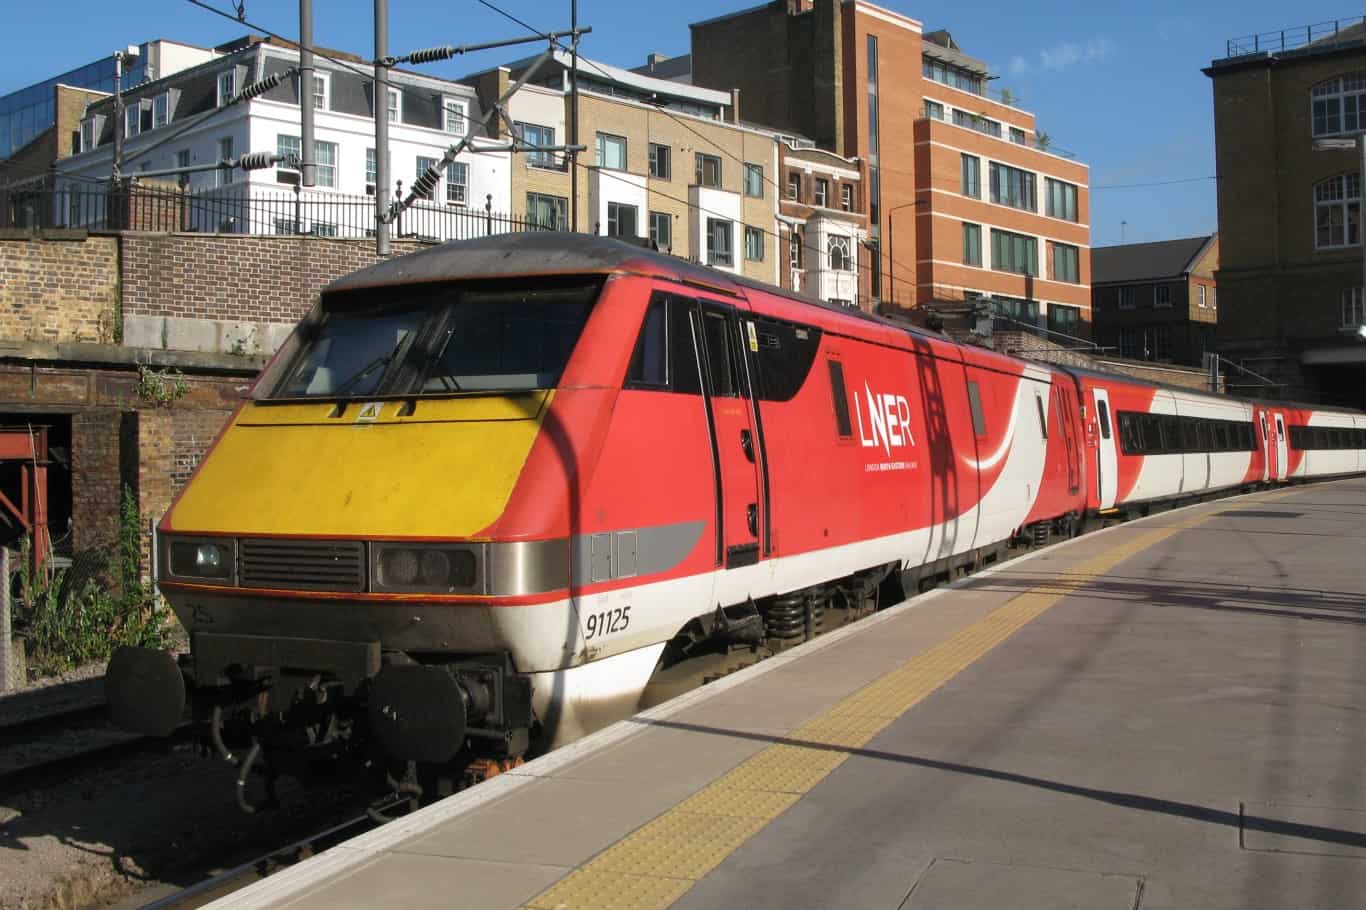 LNER to stay with Eurail after backlash- but will privatised companies follow suit?